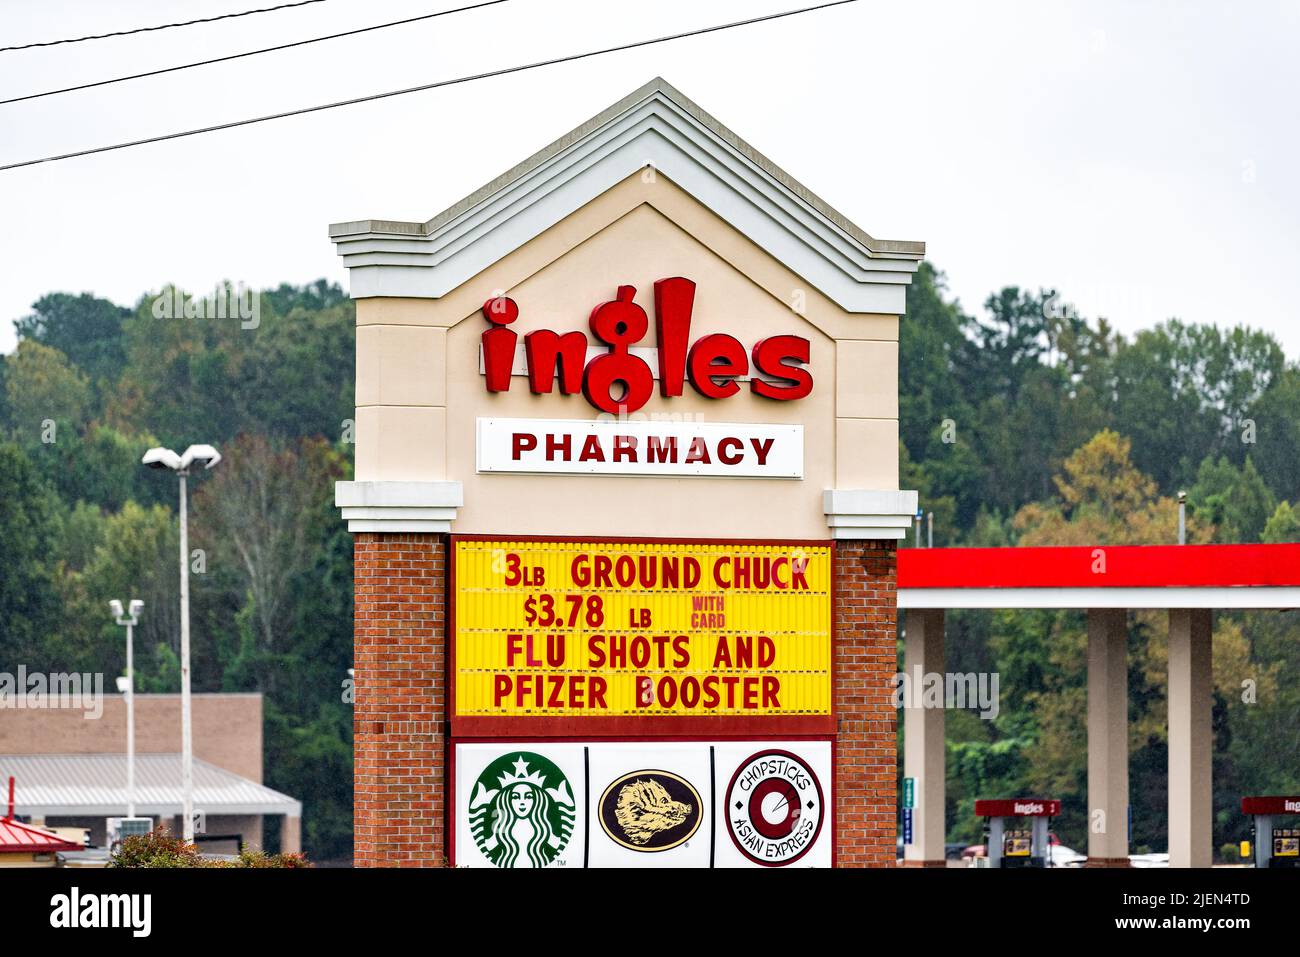 Commerce, USA - October 5, 2021: Commerce, Georgia local chain food store entrance sign for Ingles market grocery shop pharmacy with flu shots and cov Stock Photo